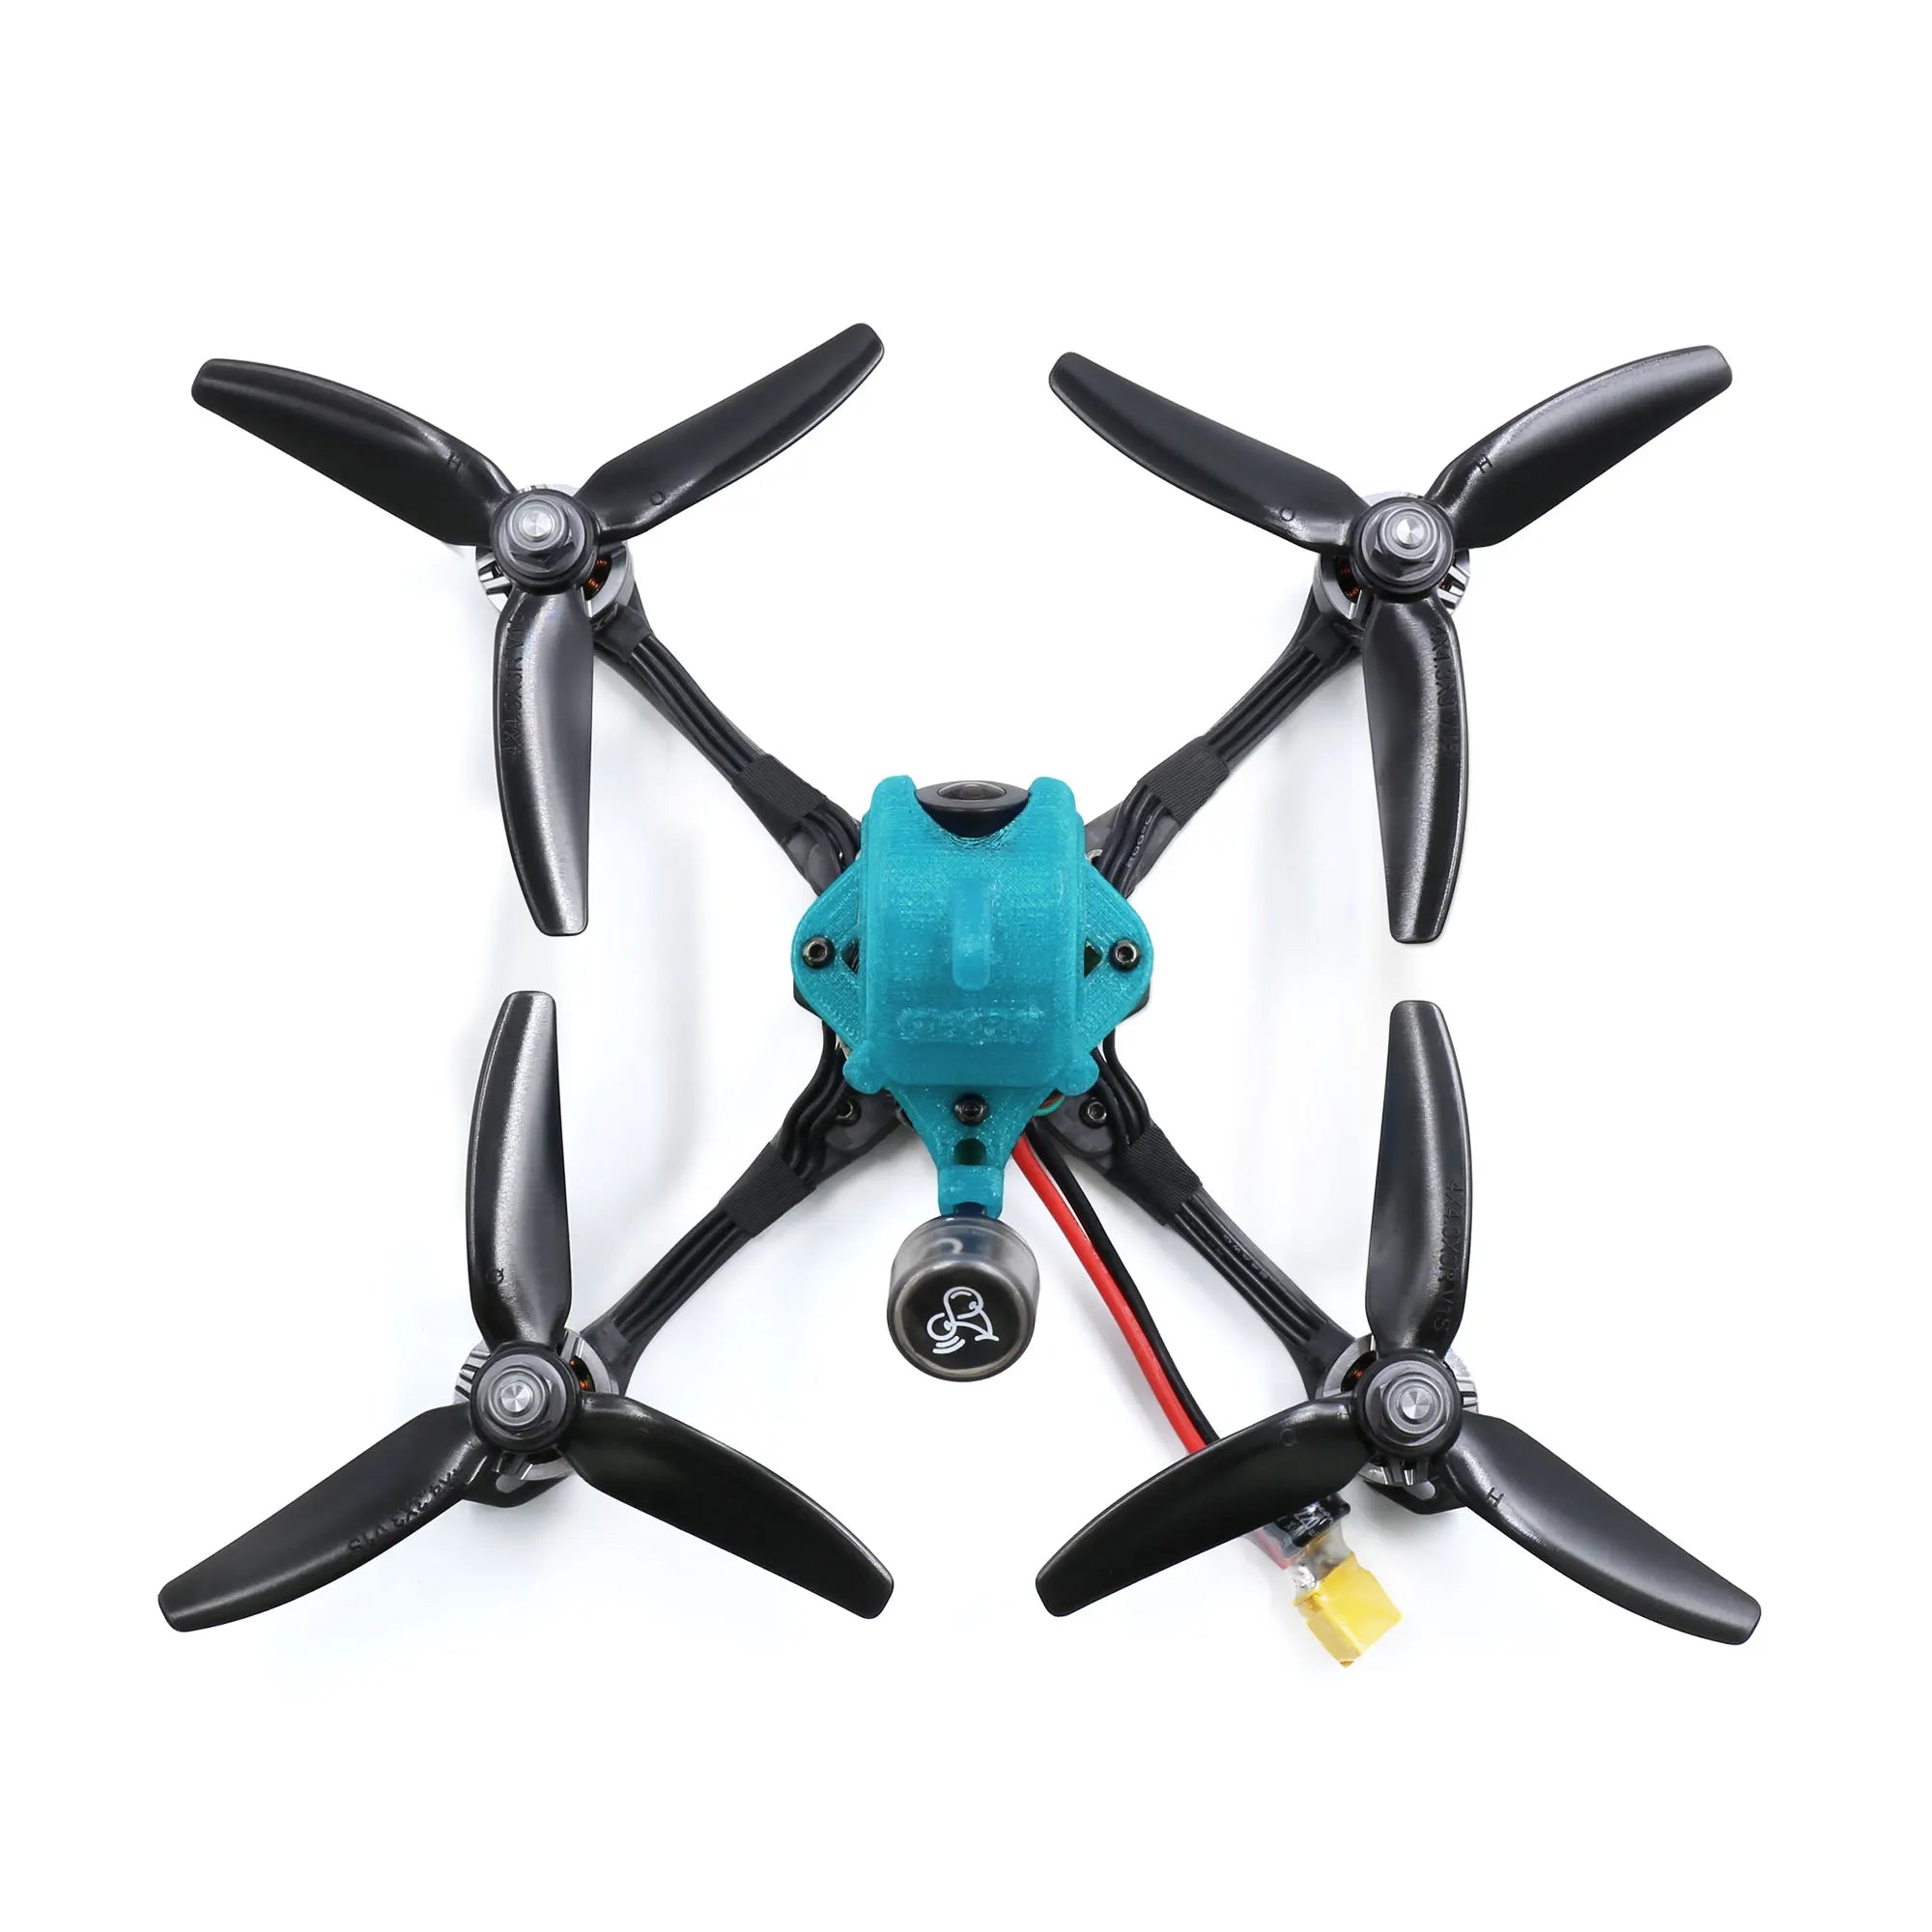 GEPRC Dolphin FPV Drone, the optimized PID has a significant noise reduction effect .